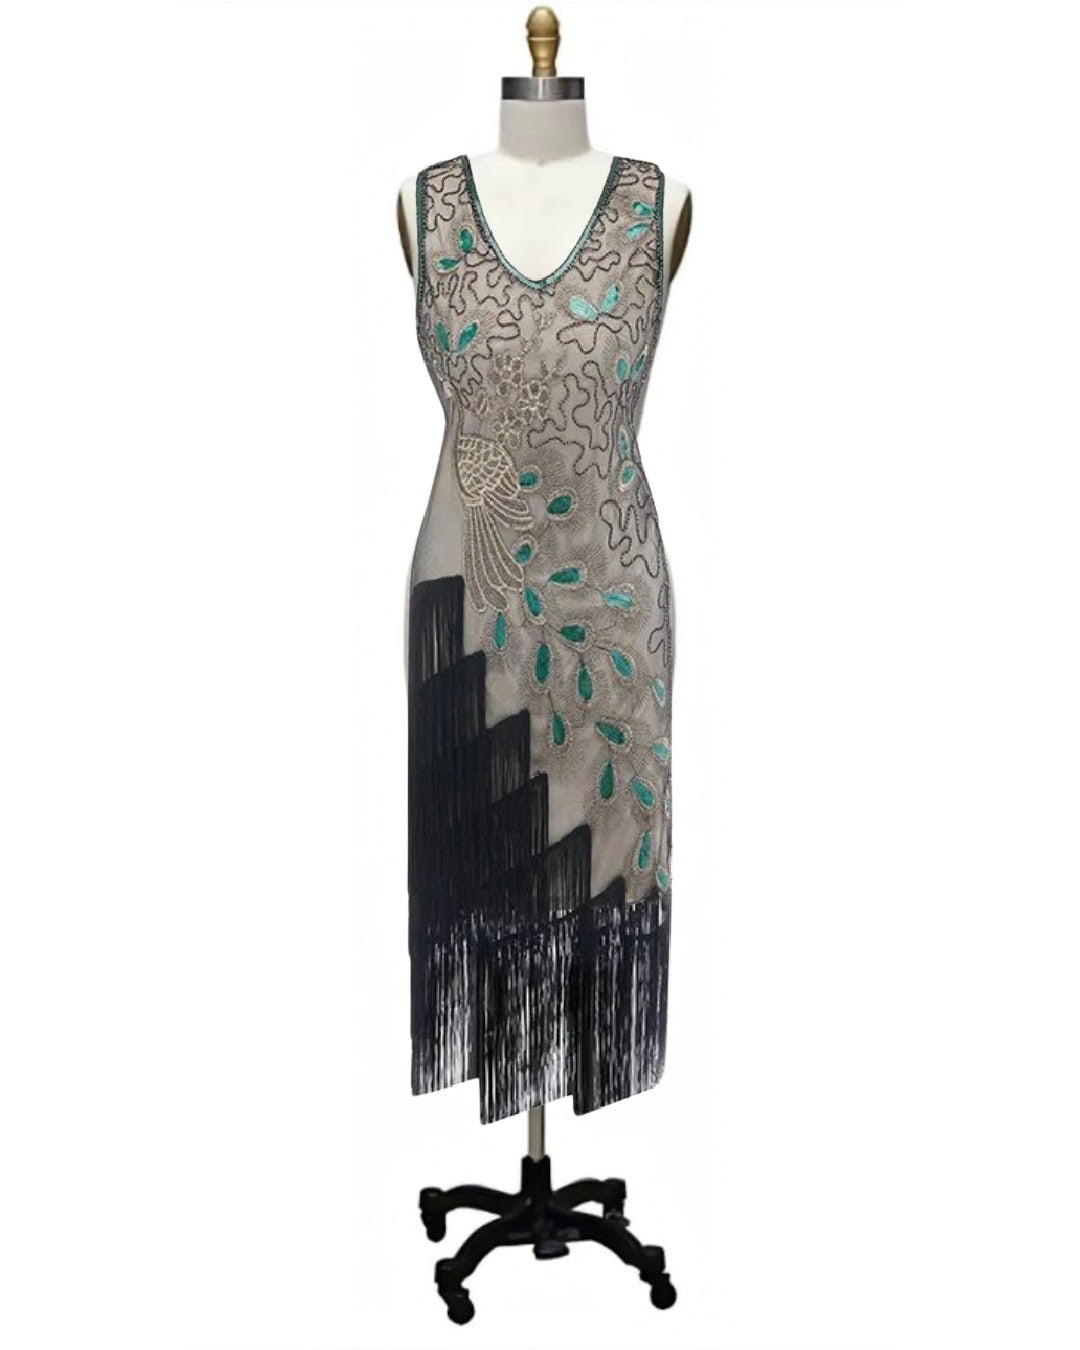 Penelope- the Peacock Design Fringed 1920s Style Dress 5 Colors